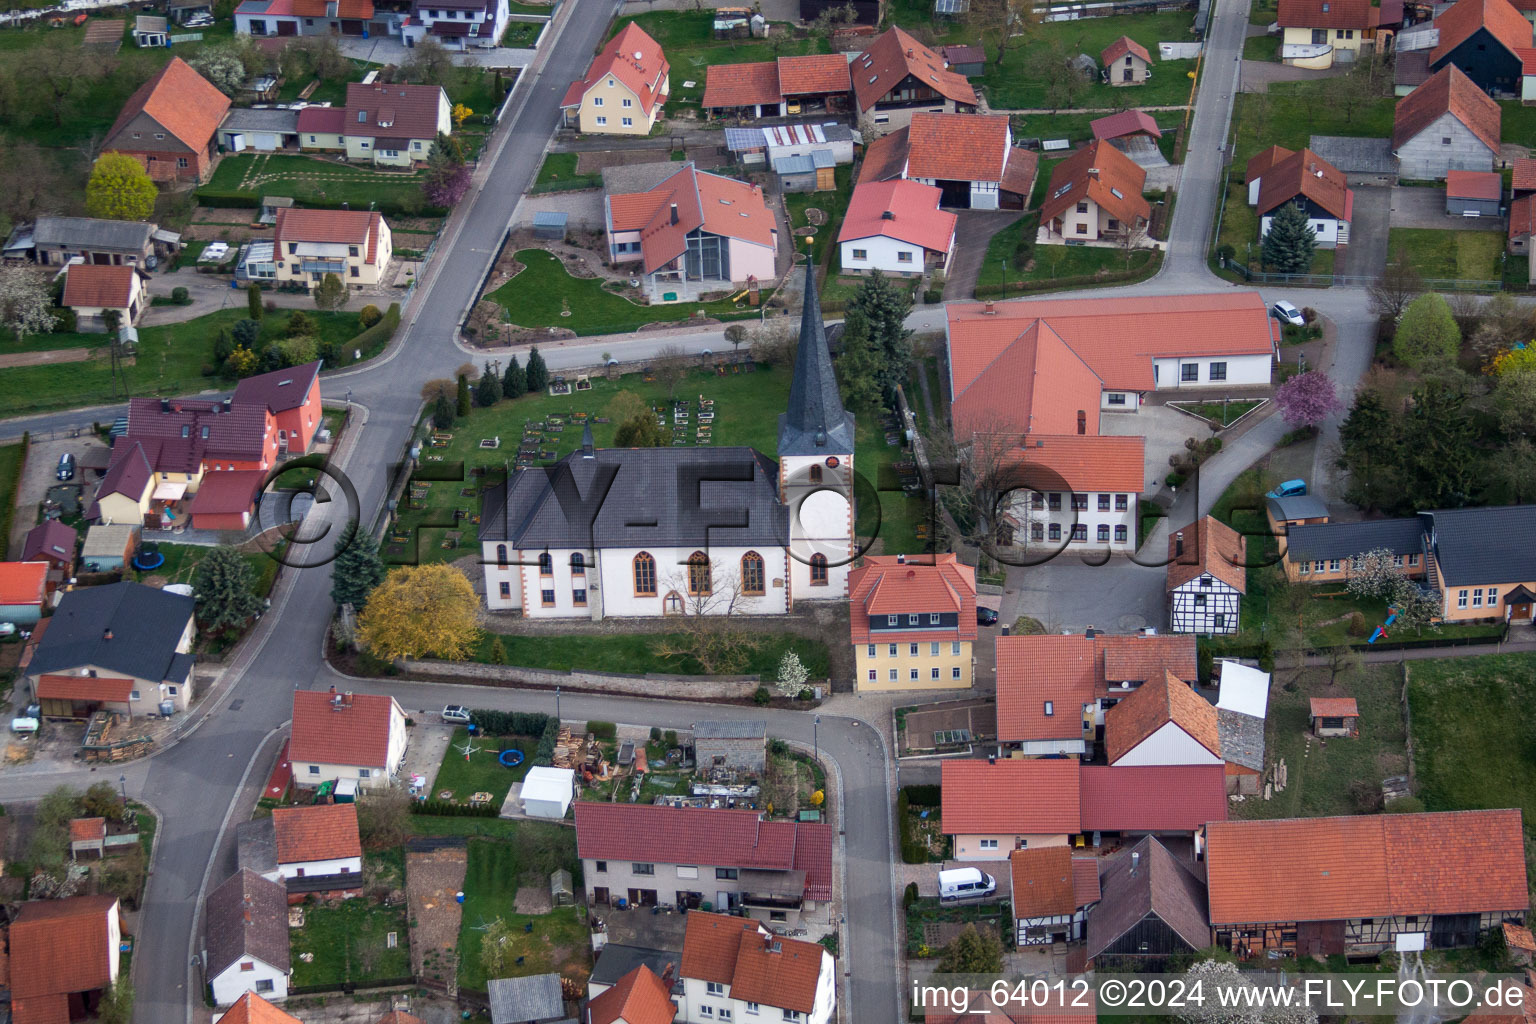 Aerial view of Village view in the district Queienfeld in Grabfeld in the state Thuringia, Germany